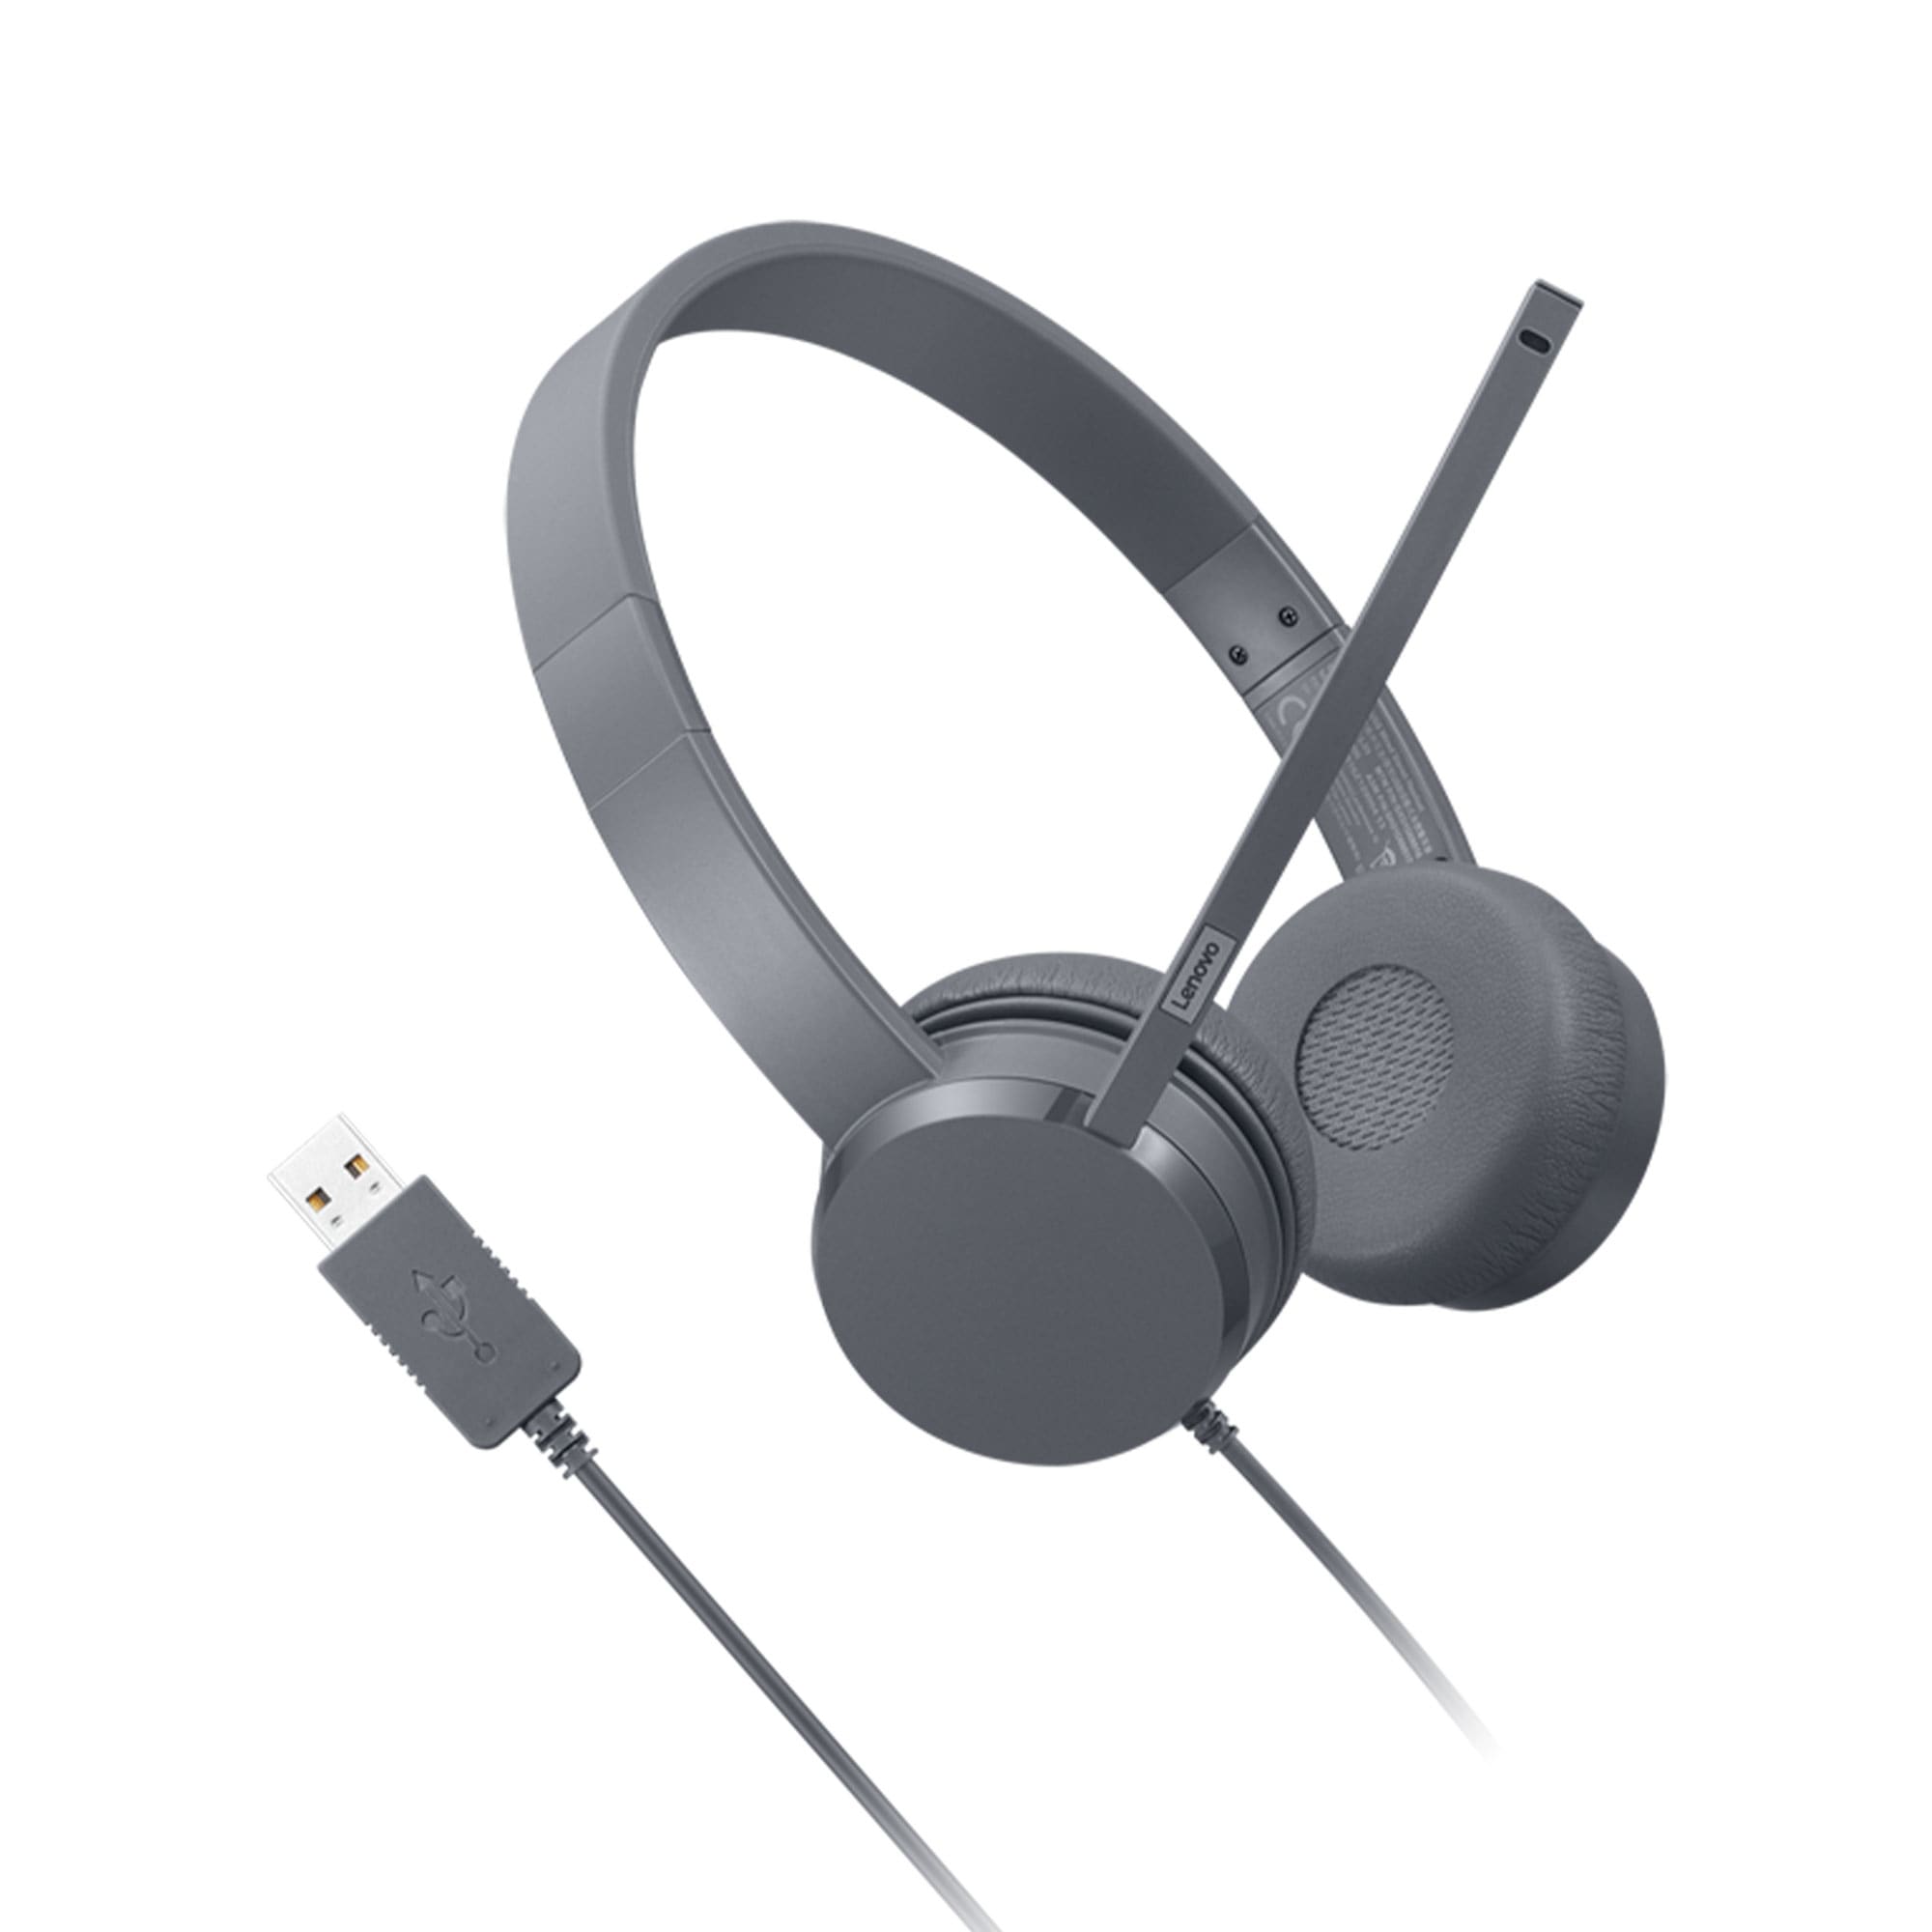 Lenovo Select USB Wired Stereo Headset - image 1 of 5